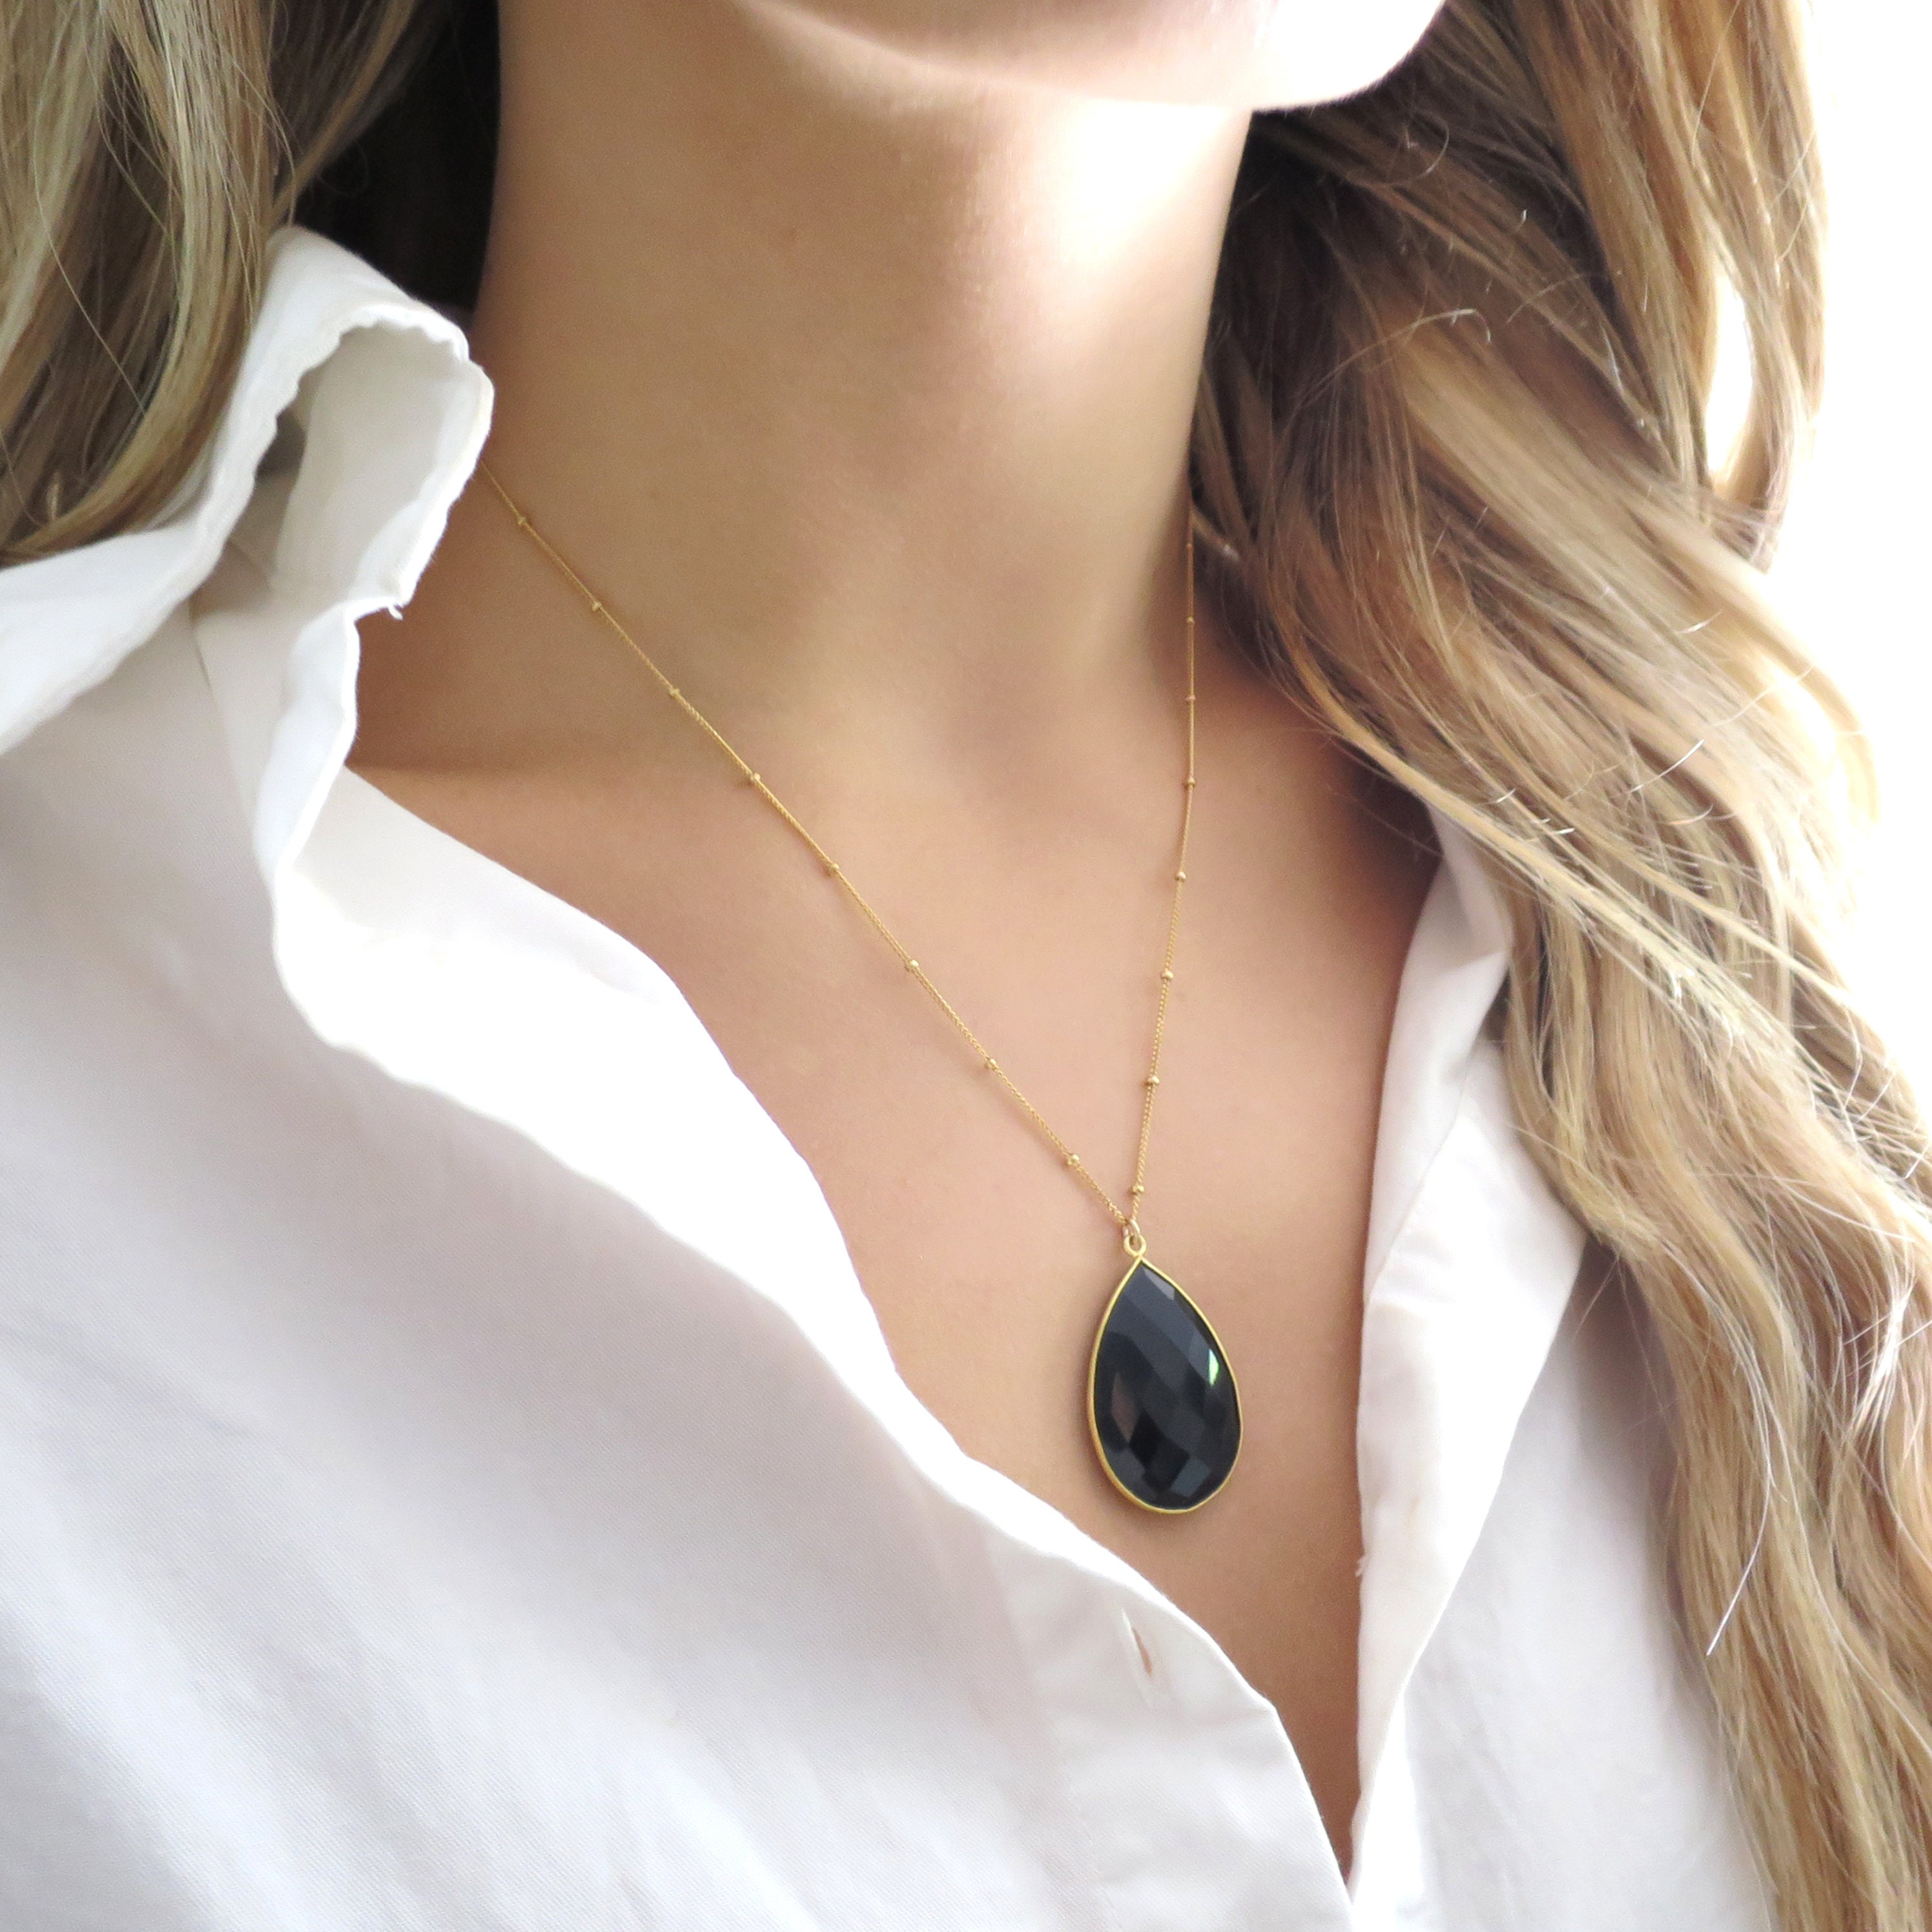 Gold Necklace with Square Onyx Pendant 24 Inches / 60.96 cm